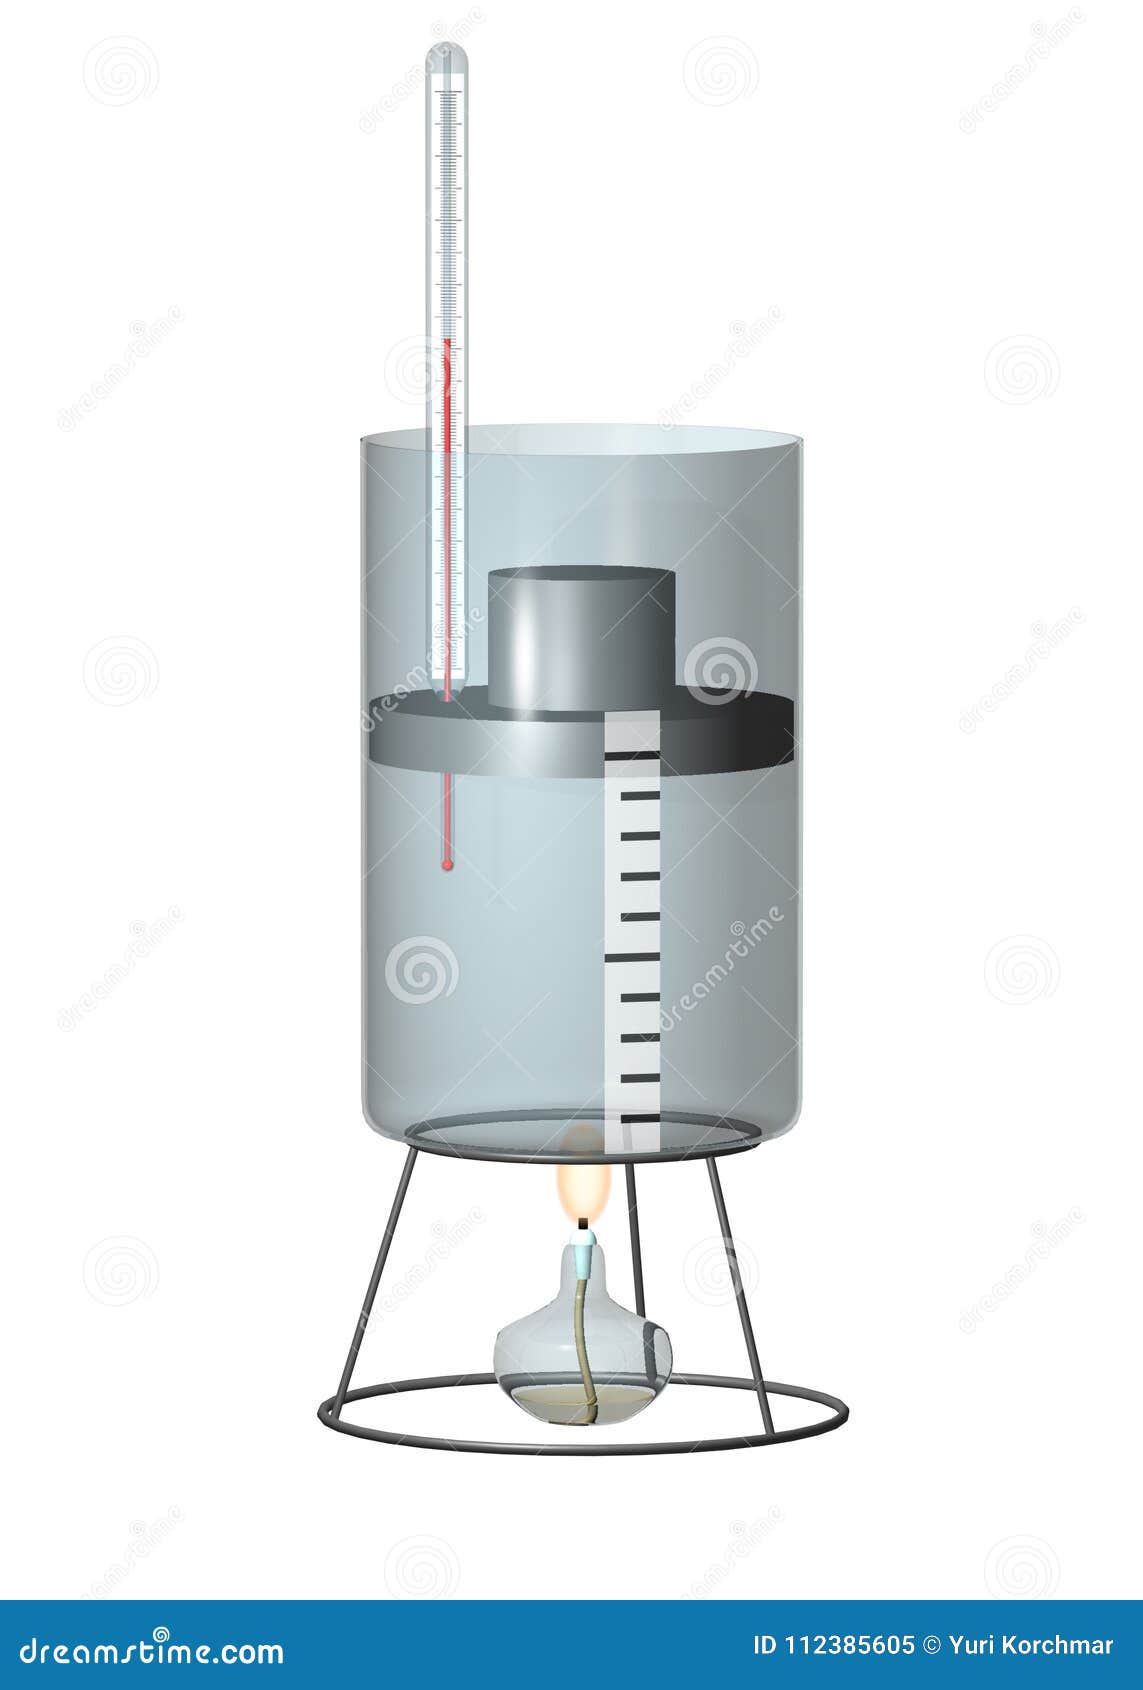 thermometer, burner, piston. science classrooms experiment. isobaric process. gay-lussac`s law.